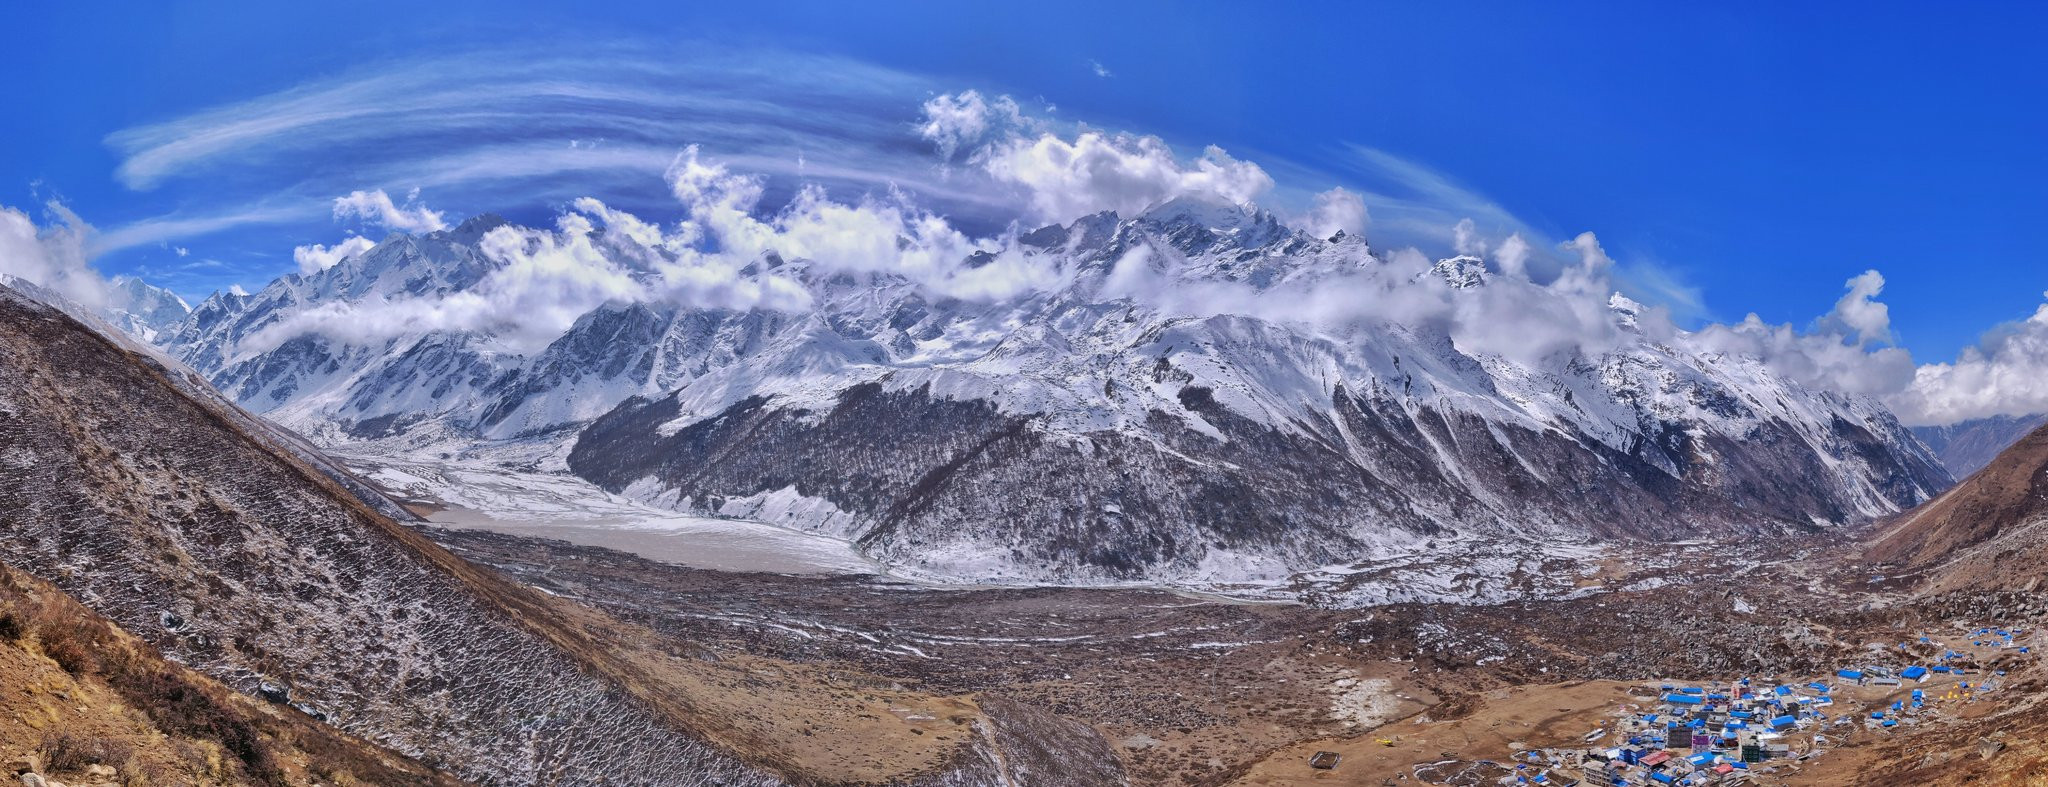 mountain view from Langtang